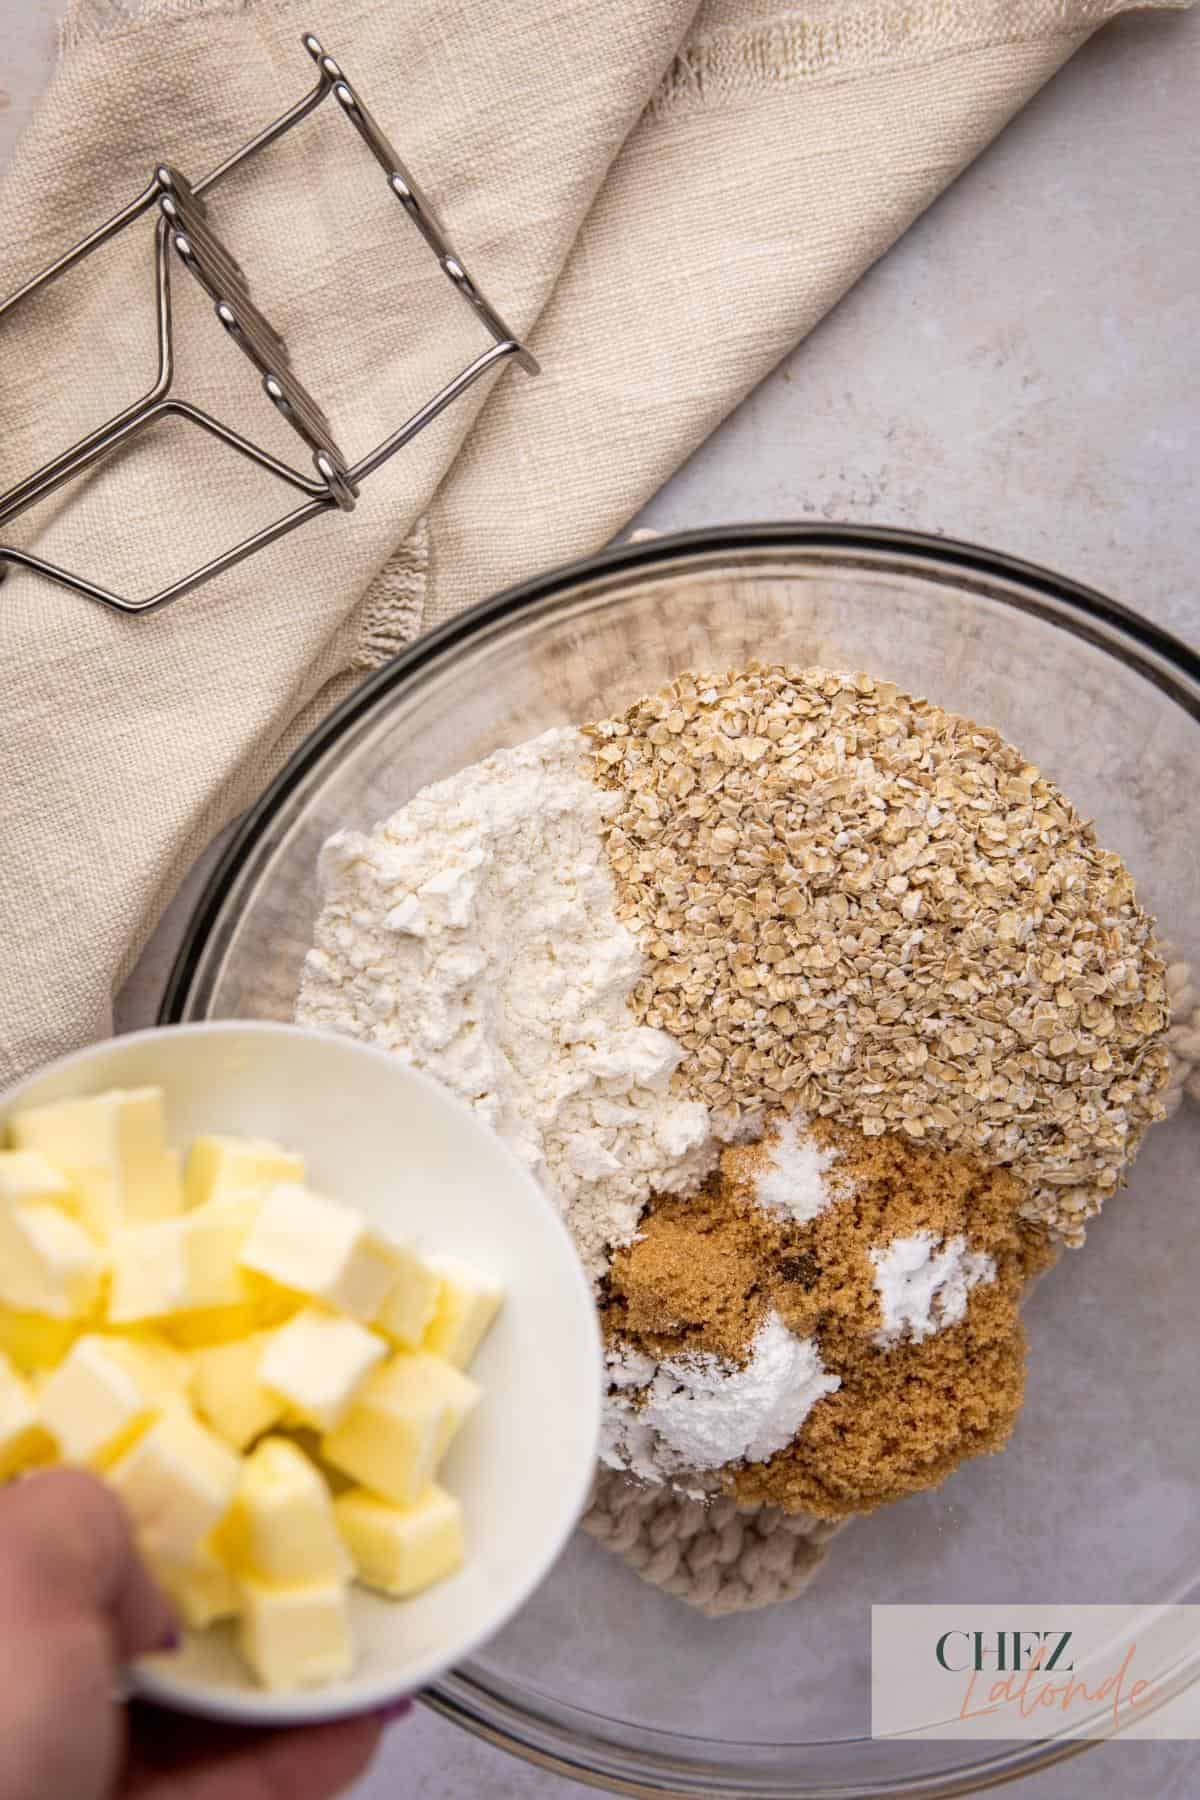 A bowl of oatmeal, butter, and other ingredients to make oatmeal toppings.